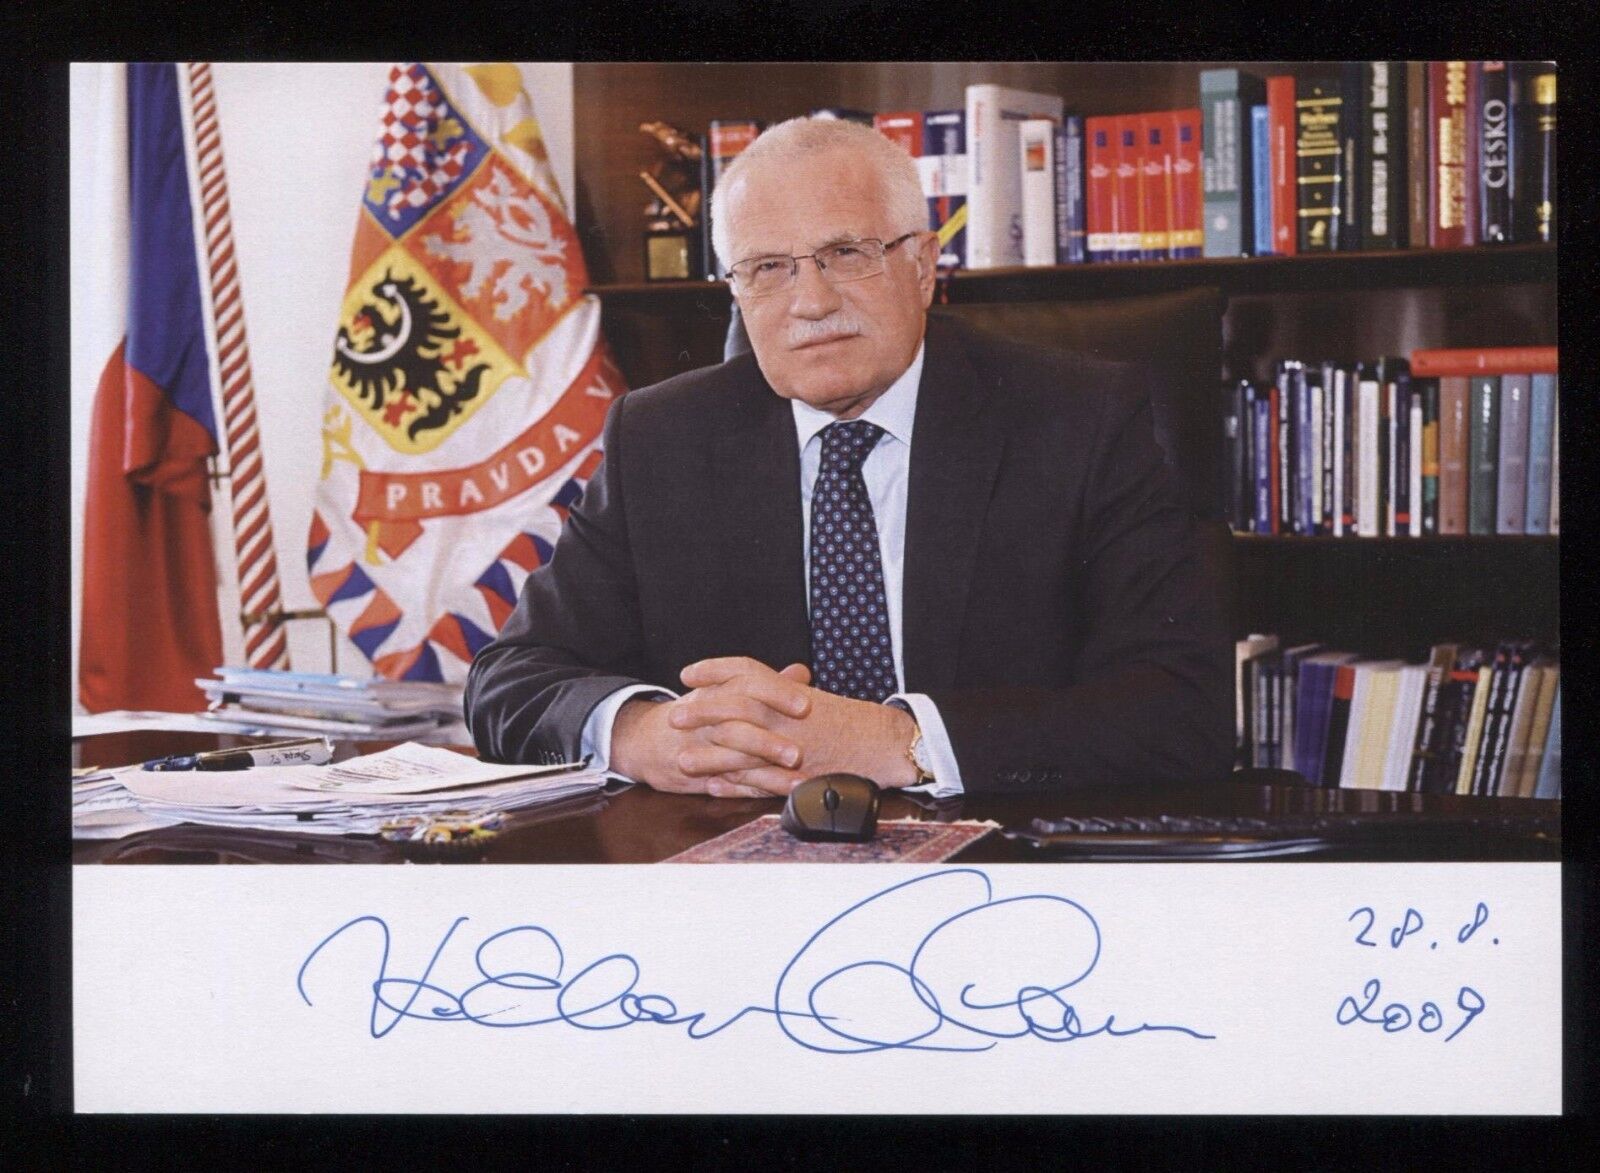 Vaclav Klaus Signed Photo Czech President and Prime Minister Autographed